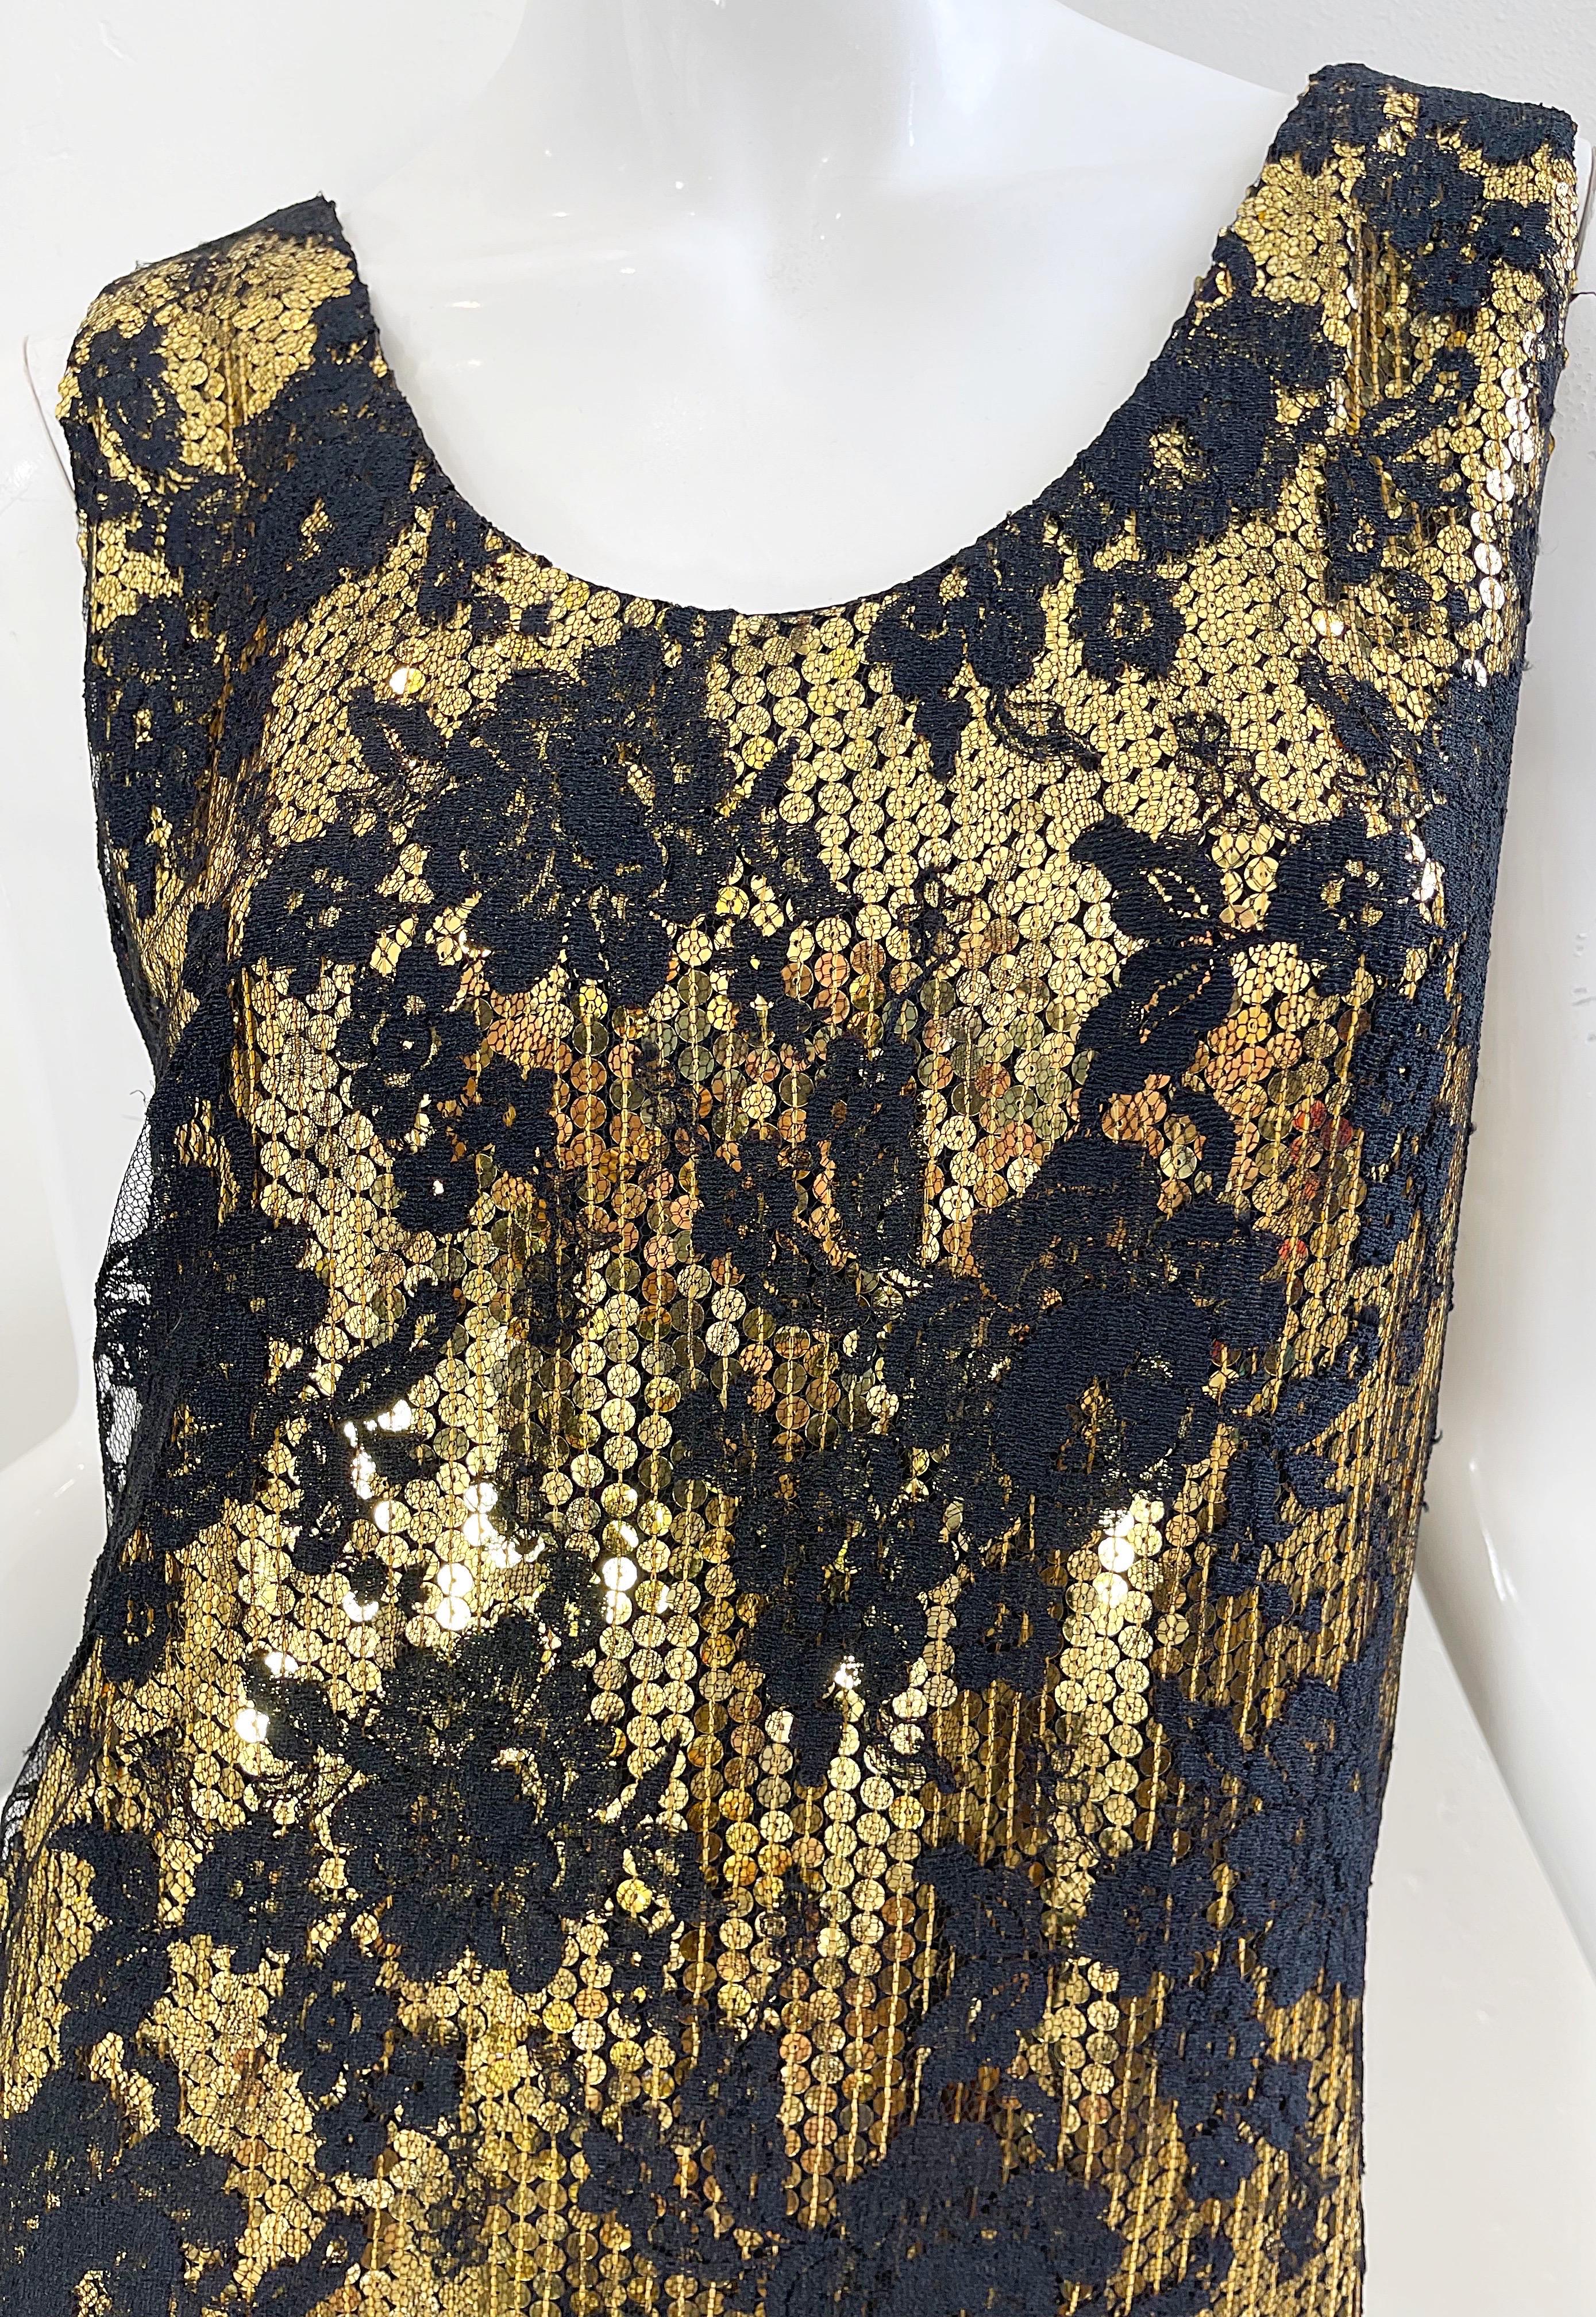 Pretty vintage 80s ( 1985 to be exact ) JEANETTE KASTENBERG 1920s 20s flapper style gold sequin cocktail dress with attached black lace overlay. Kastenberg’s collaboration with the St. Martin fashion line contains pieces that are very rare and often